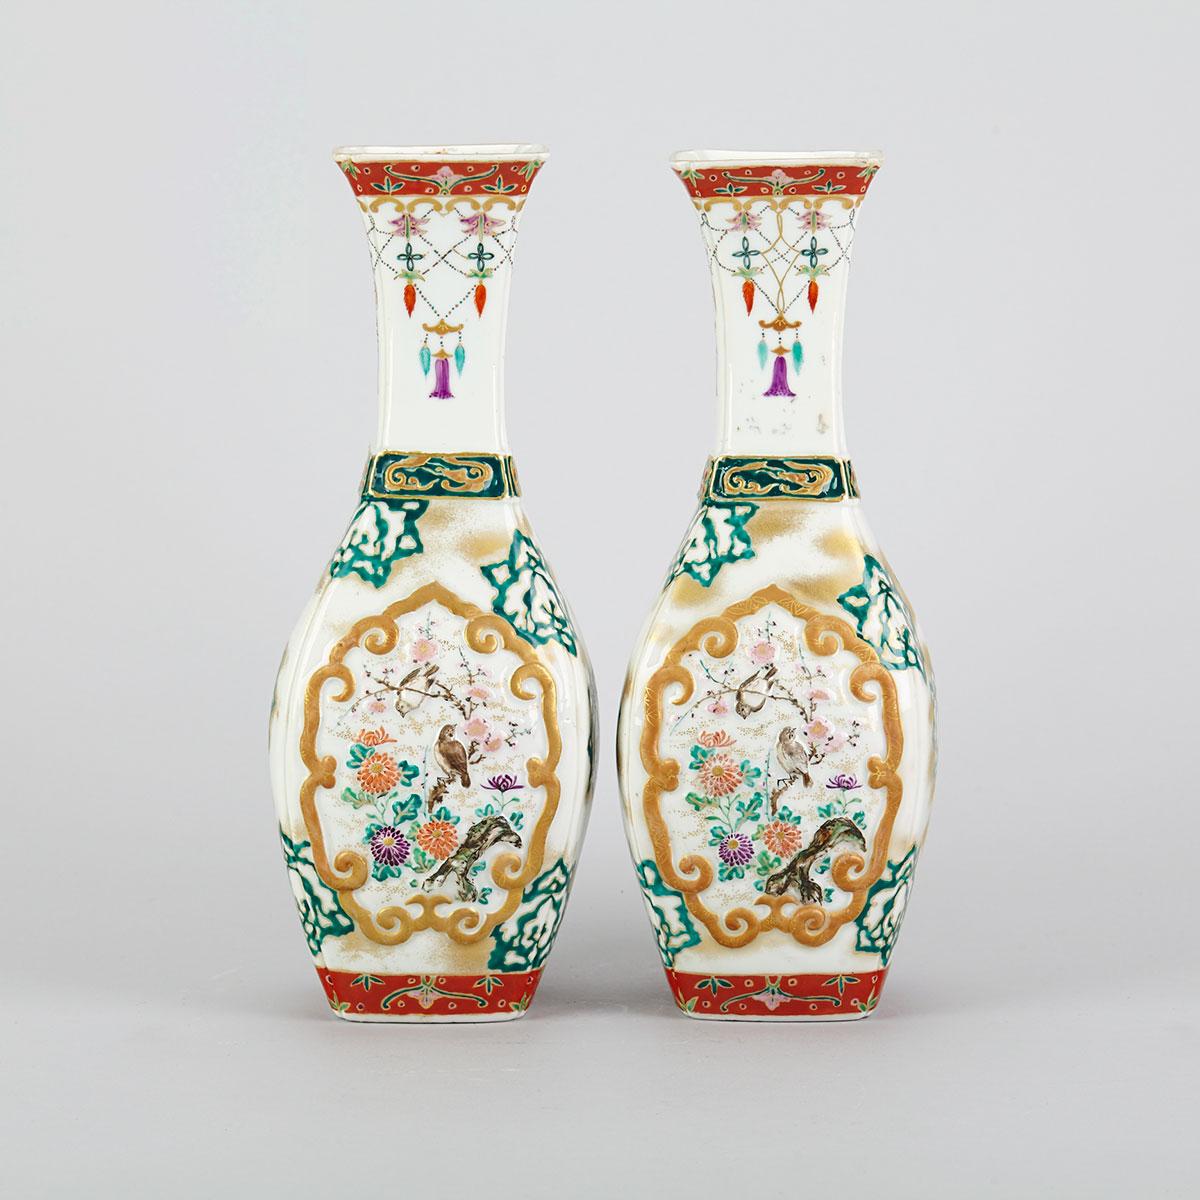 Pair of Moulded Satsuma-Type Bottle Vases, Circa 1900